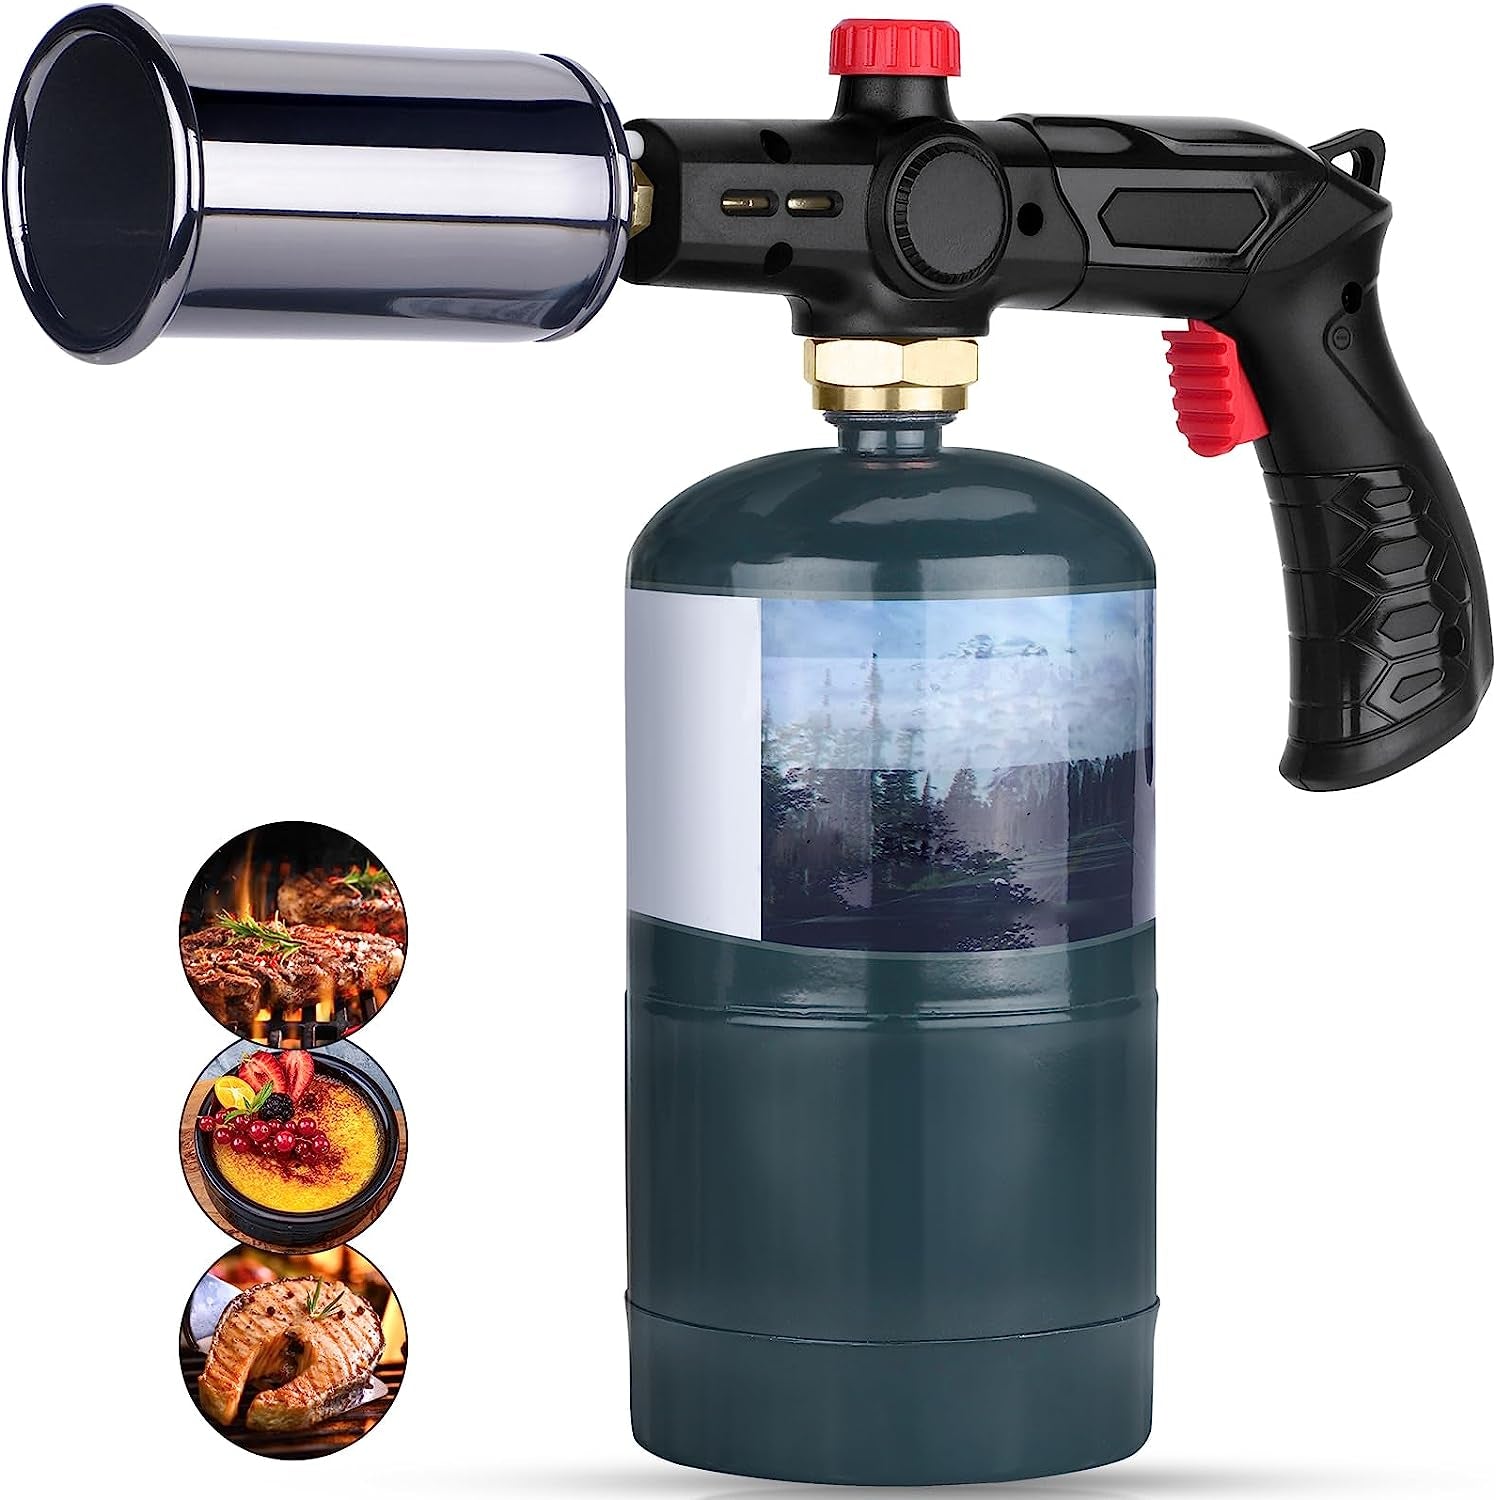 POWERFUL Kitchen Cooking Torch-Propane Torch-Sous Vide-Charcoal Torch Lighter - Grilling Culinary Kitchen Torch for BBQ Searing Steak,Creme Brulee,Campfire Charcoal Starter (Propane Tank Not Included)